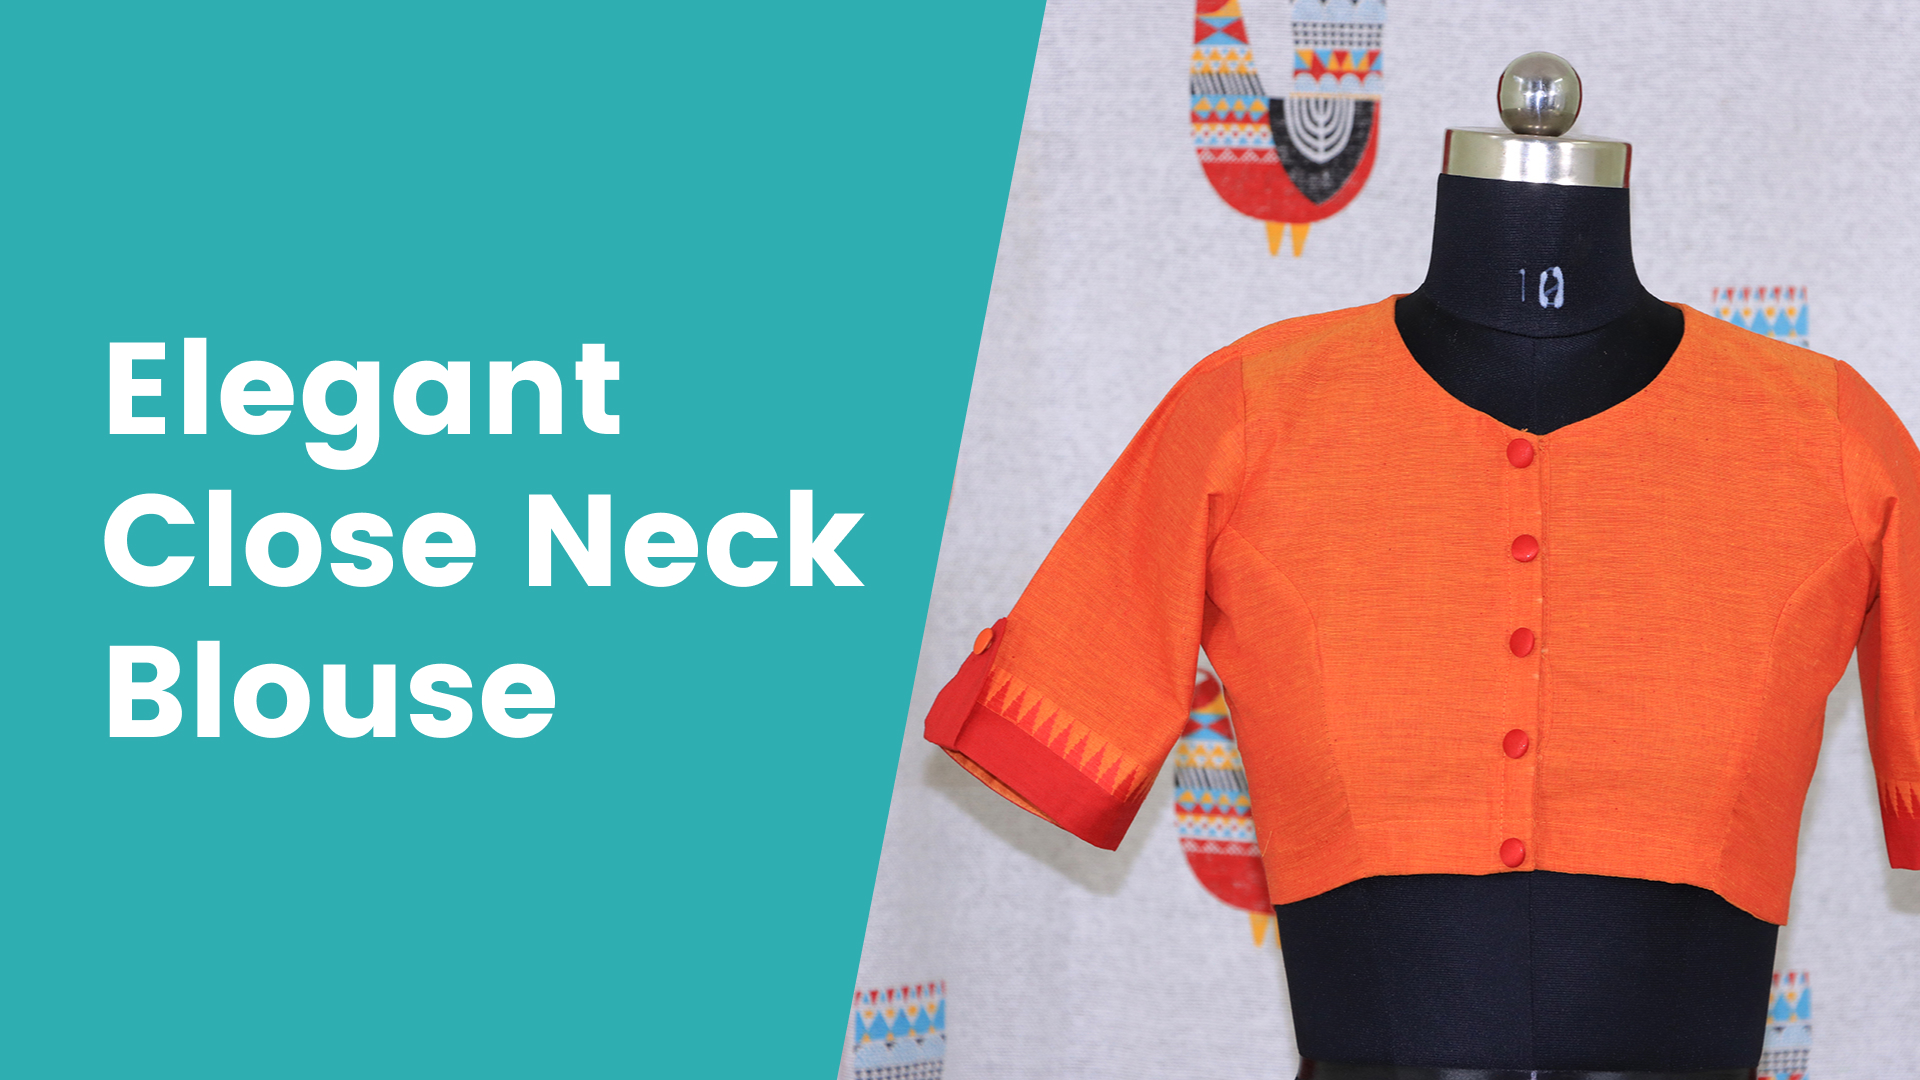 Course Trailer: How to Stitch a High Neck Blouse / Close Neck Blouse. Watch to know more.